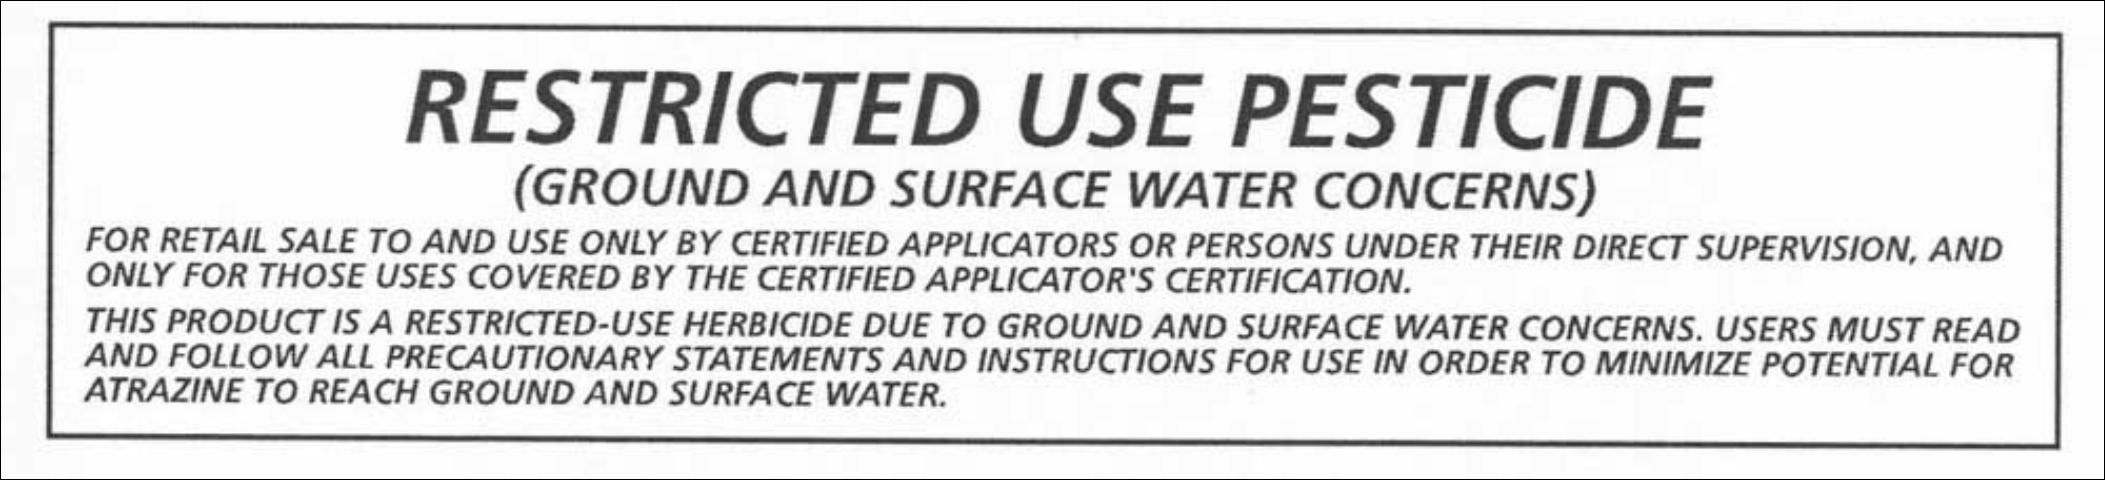 Figure 1. Some pesticide products may be classified as restricited-use because of environmental concerns.